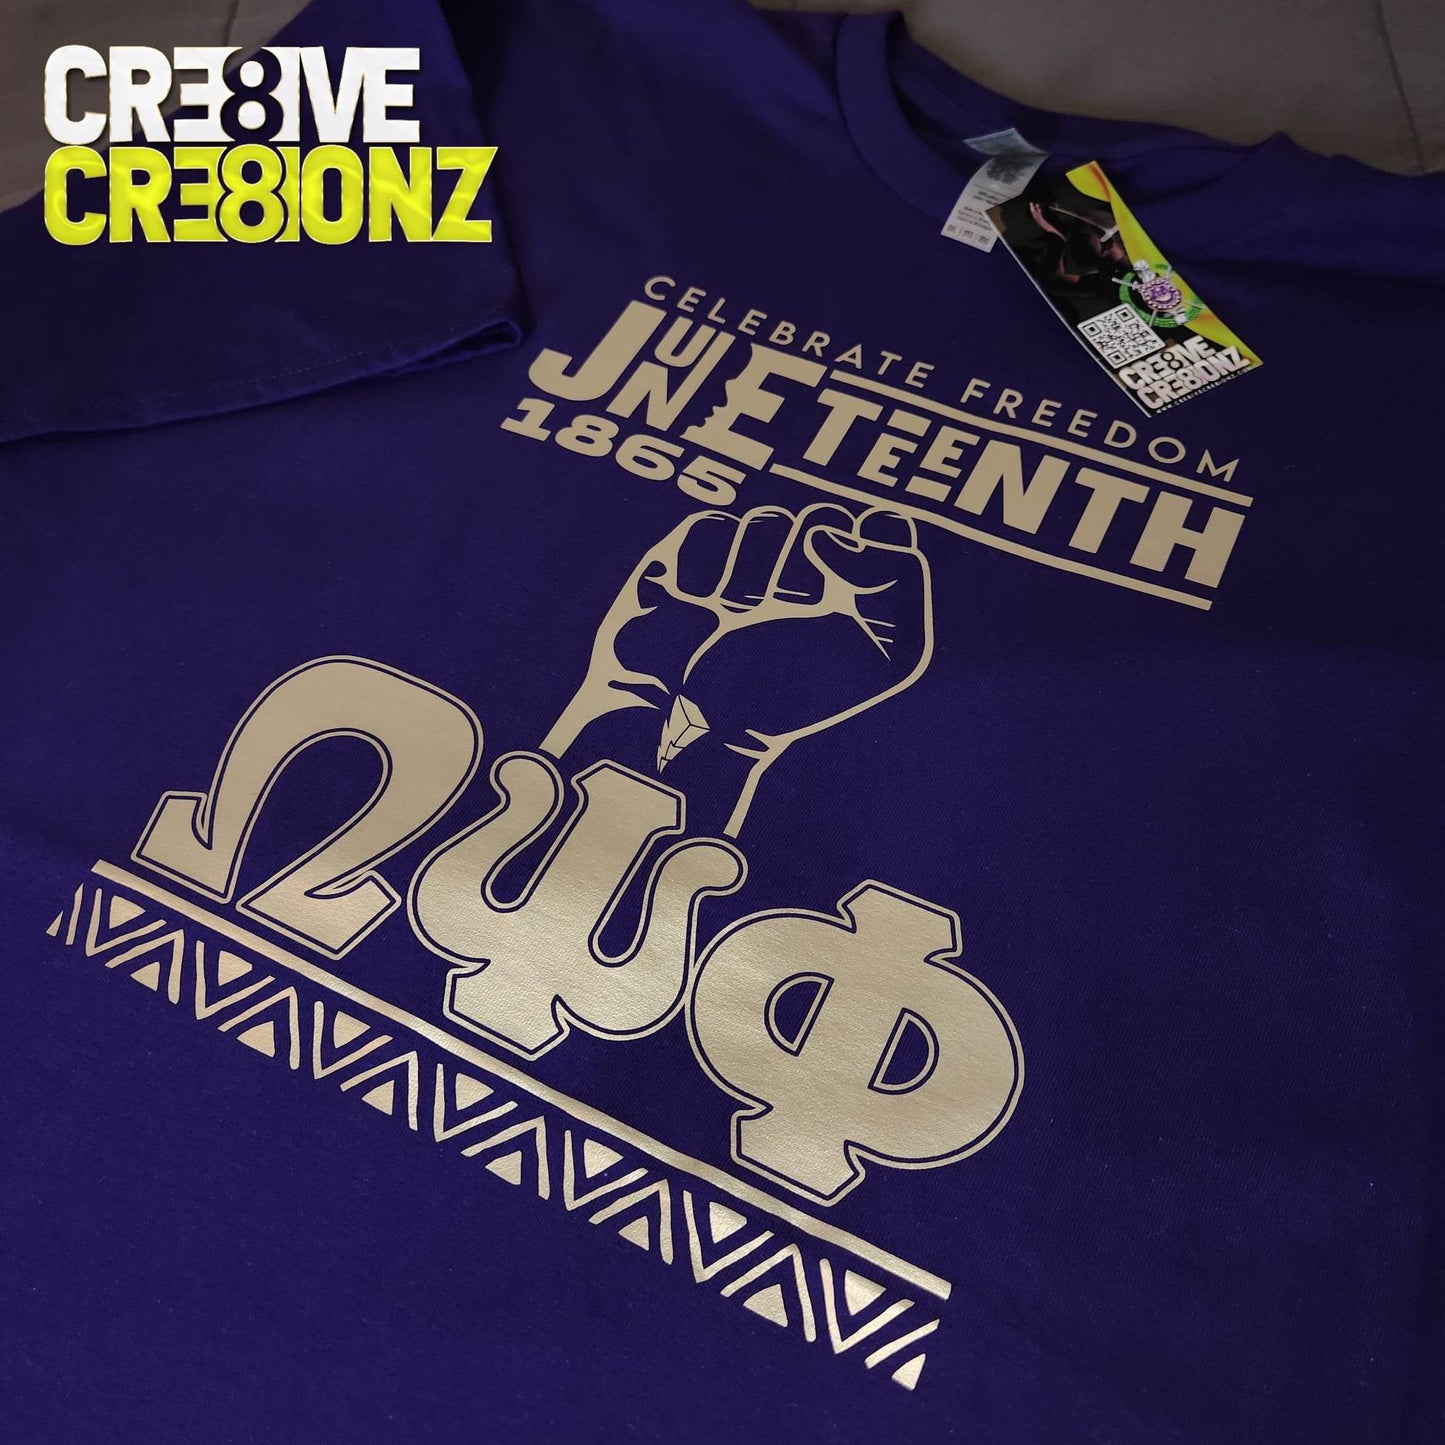 Juneteenth Omega Shirt - Cre8ive Cre8ionz